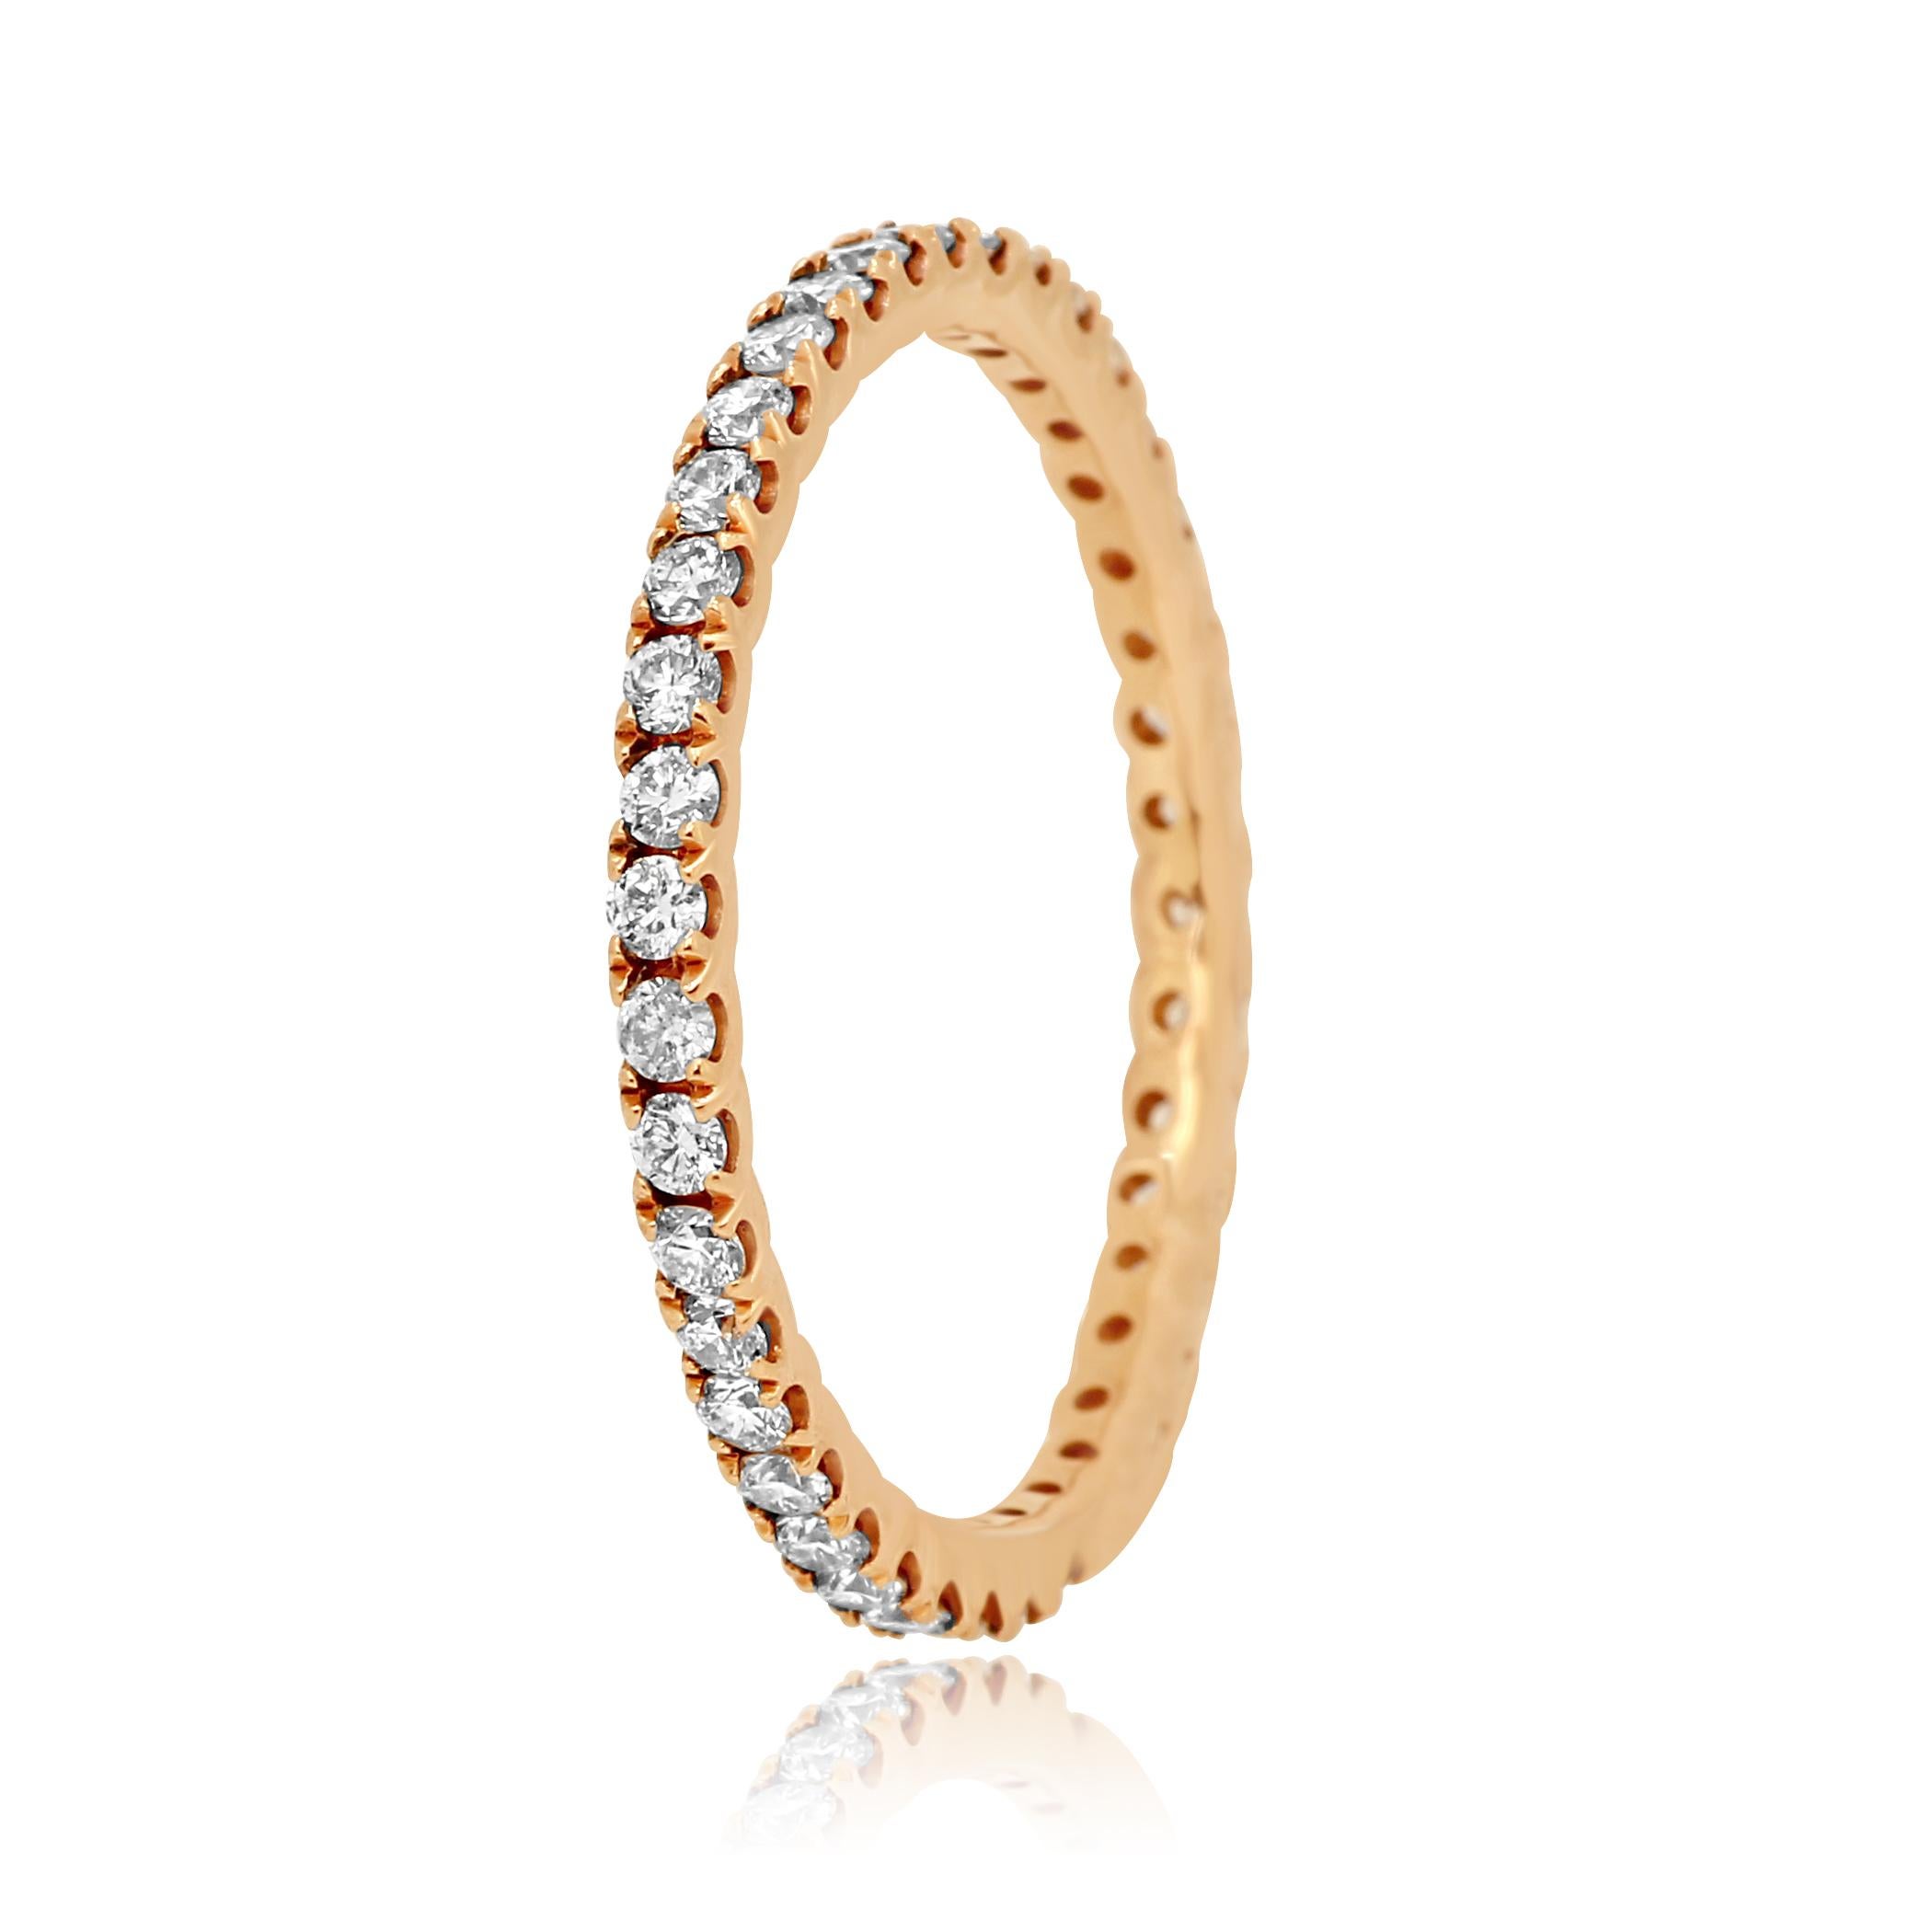 White Diamond Rounds 0.56 Carat set in 14K  Rose Gold Eternity Band Ring.

Total Diamond Weight 0.56 Carat

Can be Customized for different Ring Size as well as Different Gold Color.